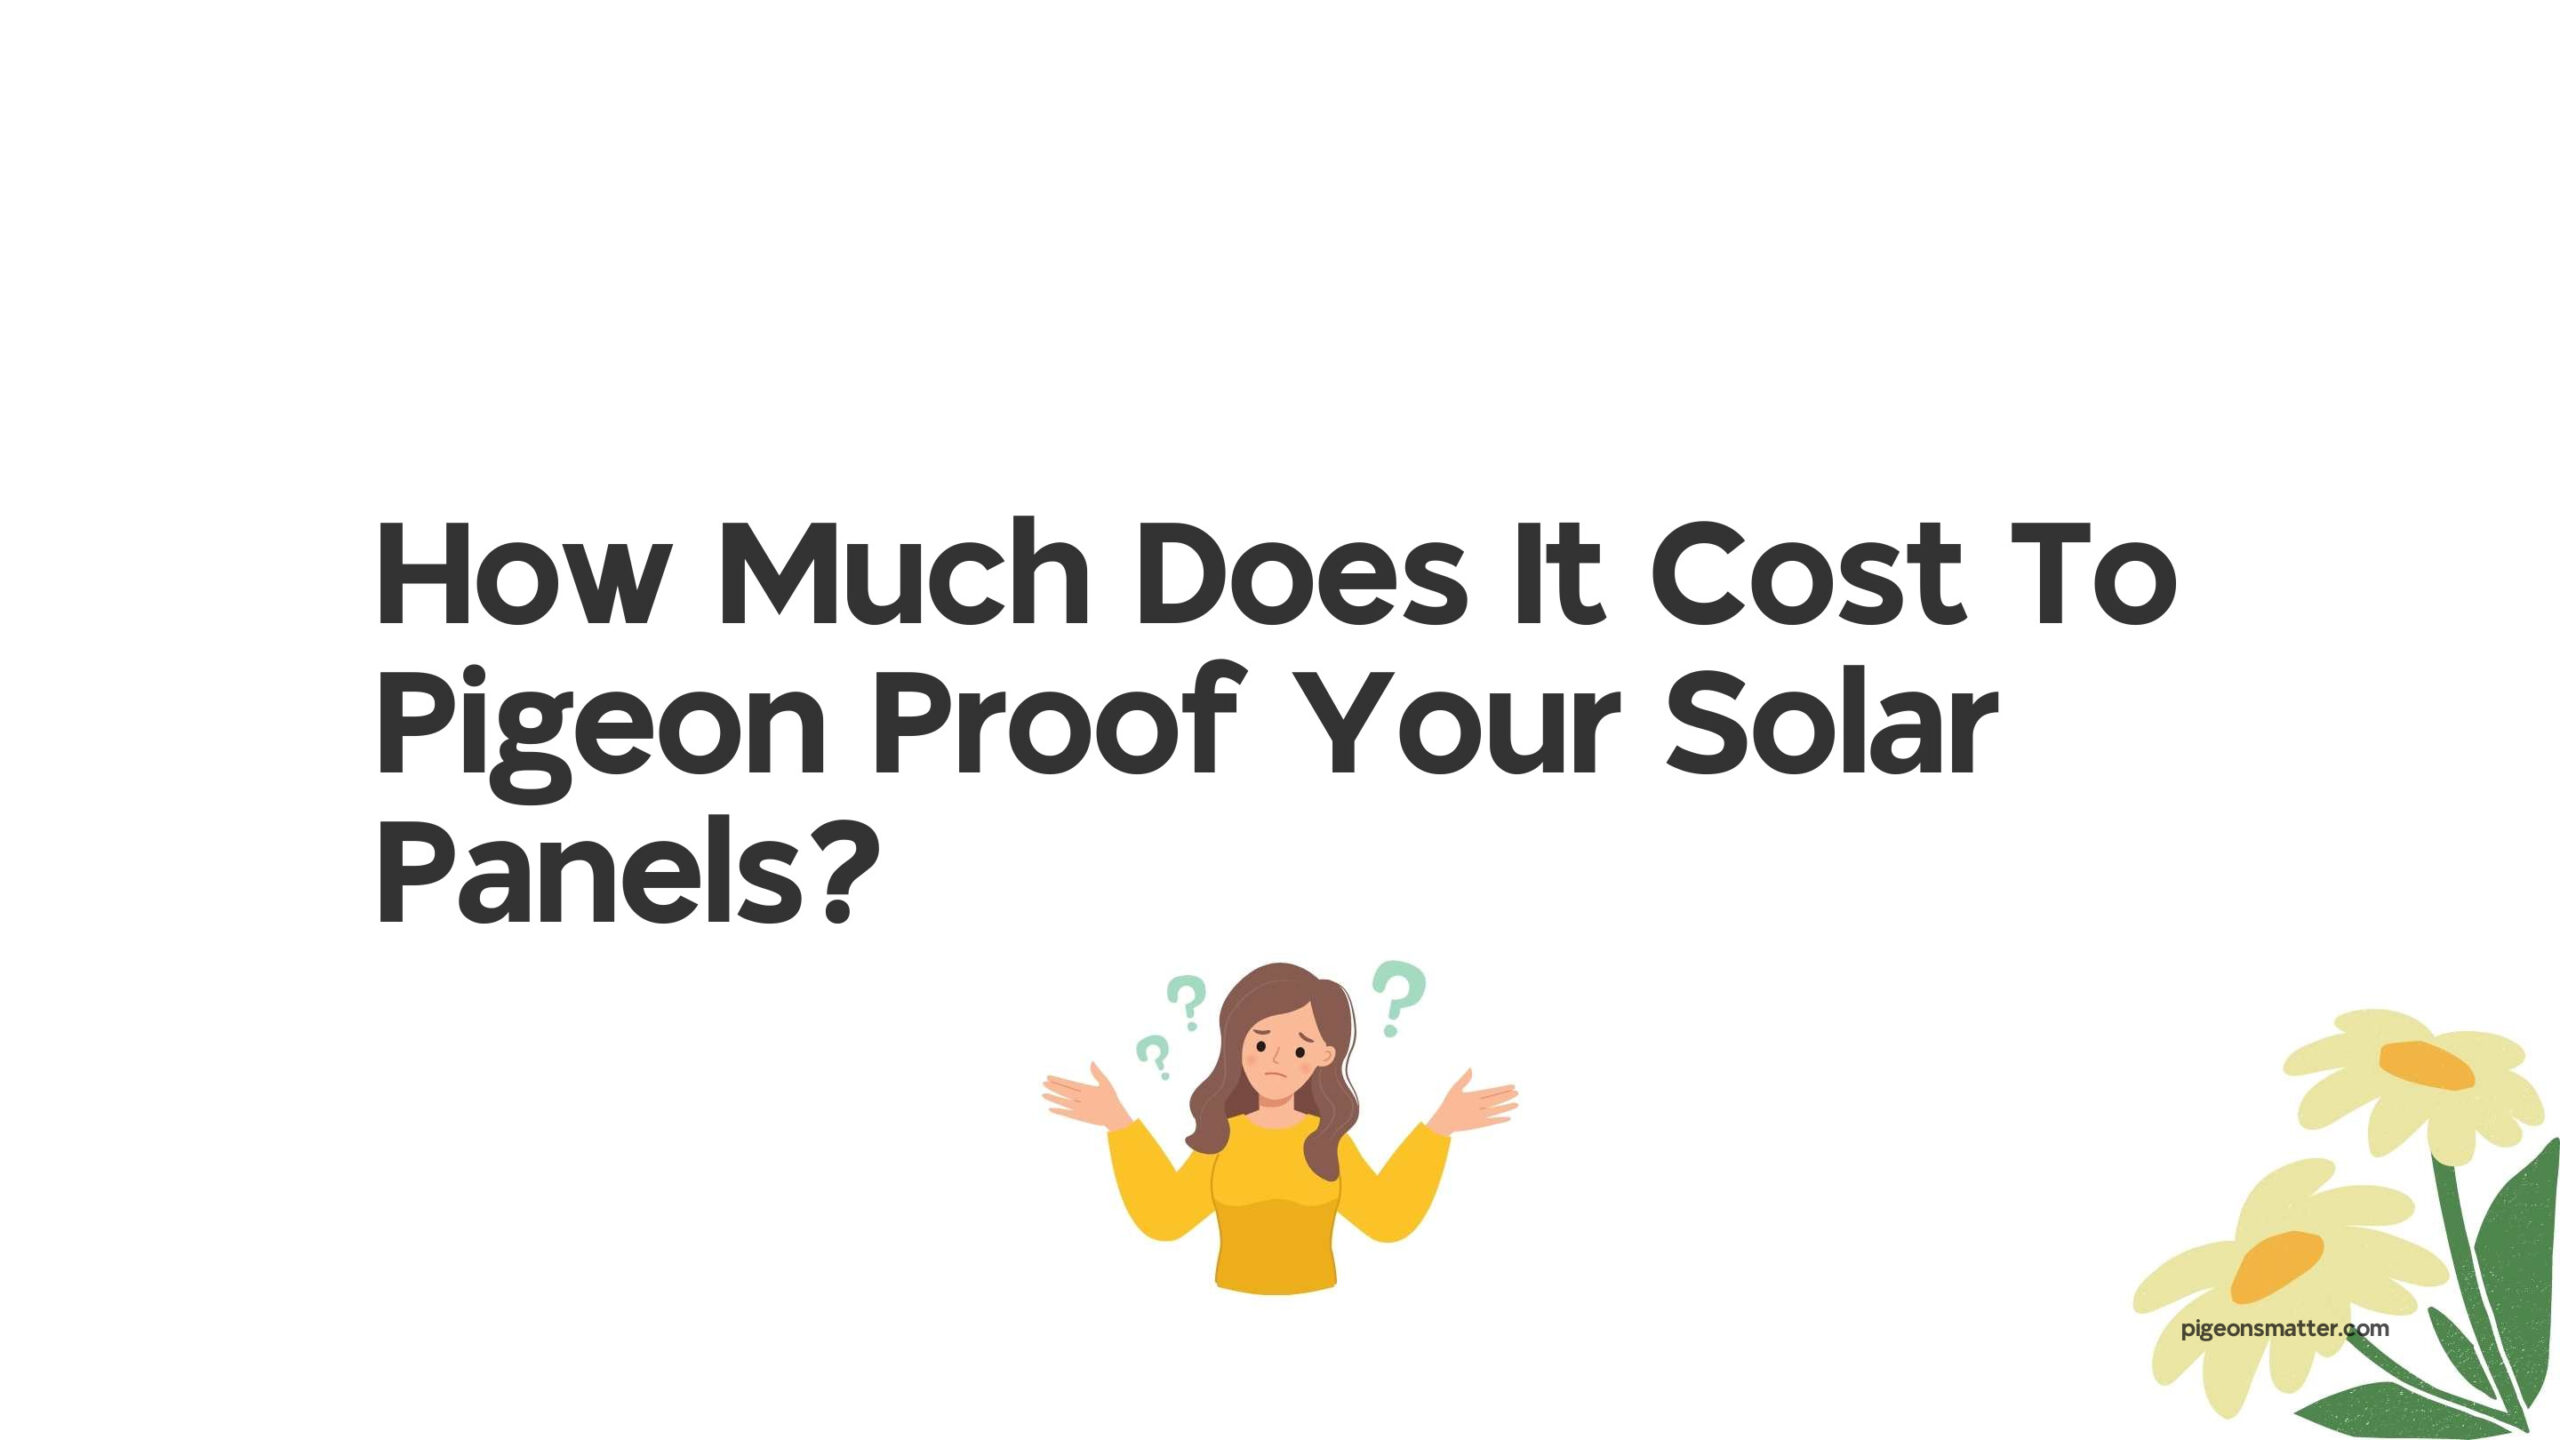 How Much Does It Cost To Pigeon Proof Your Solar Panels?